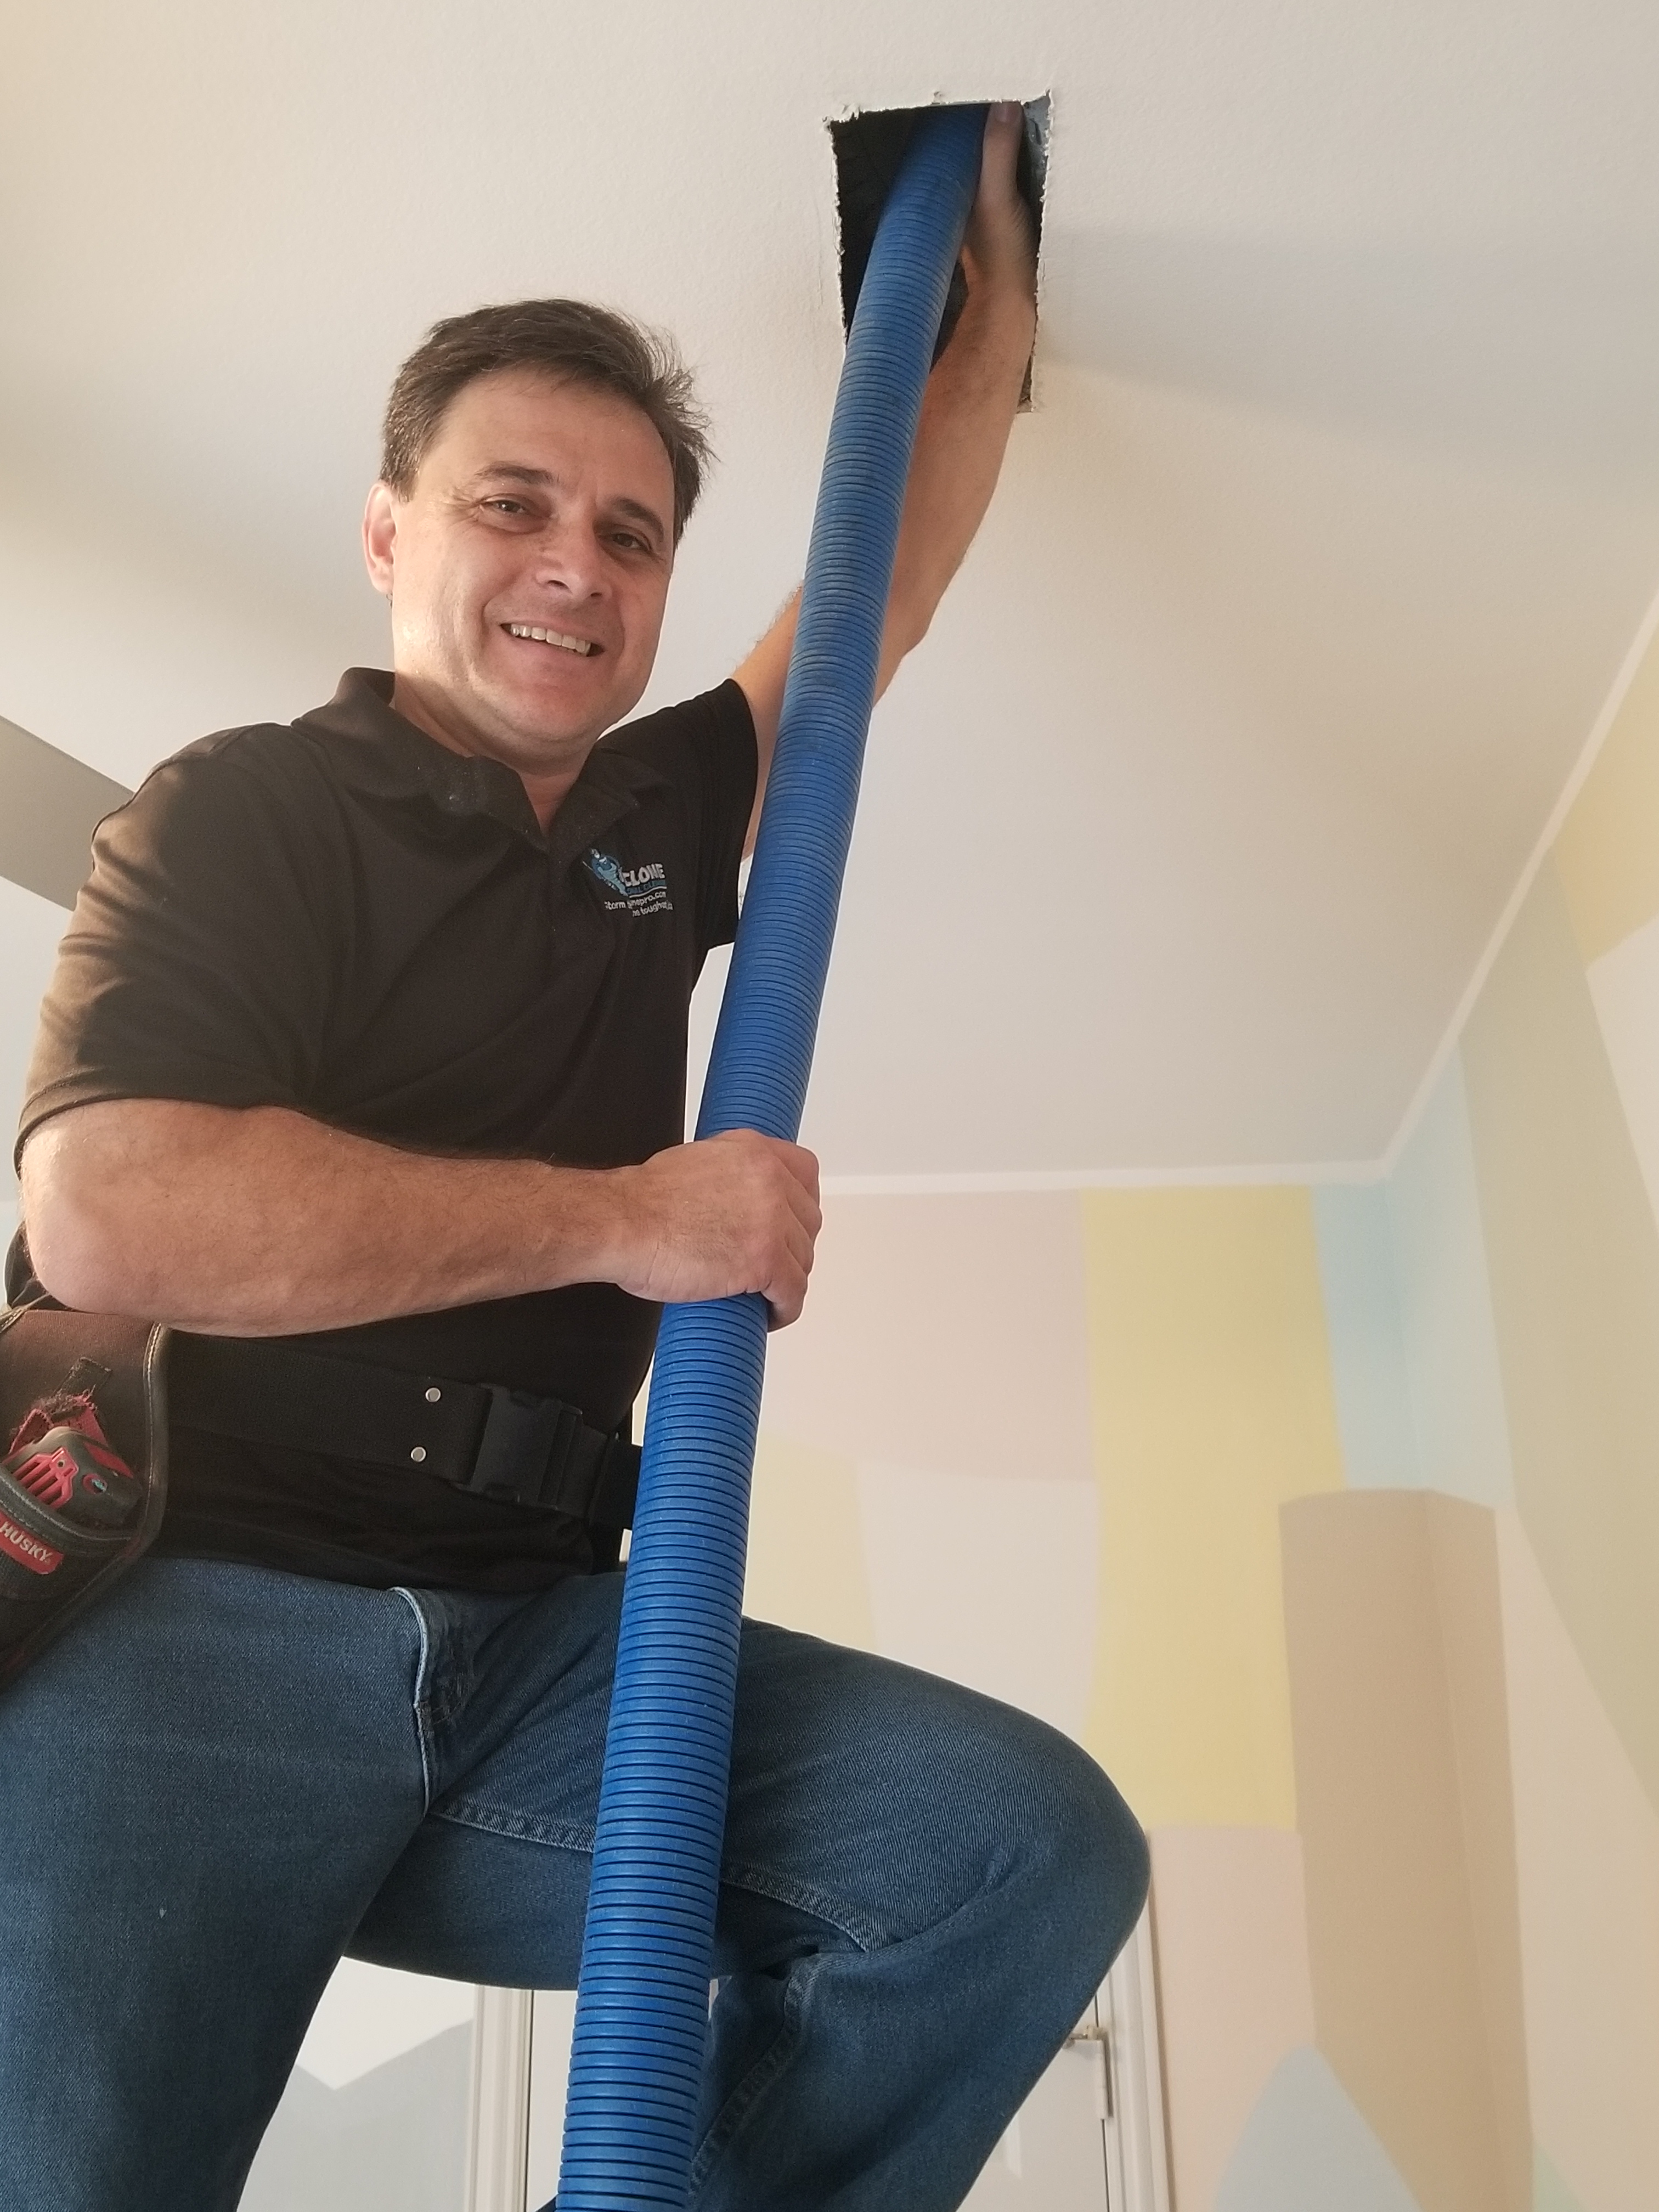 Cyclone professional cleaning an air duct in Plano Texas